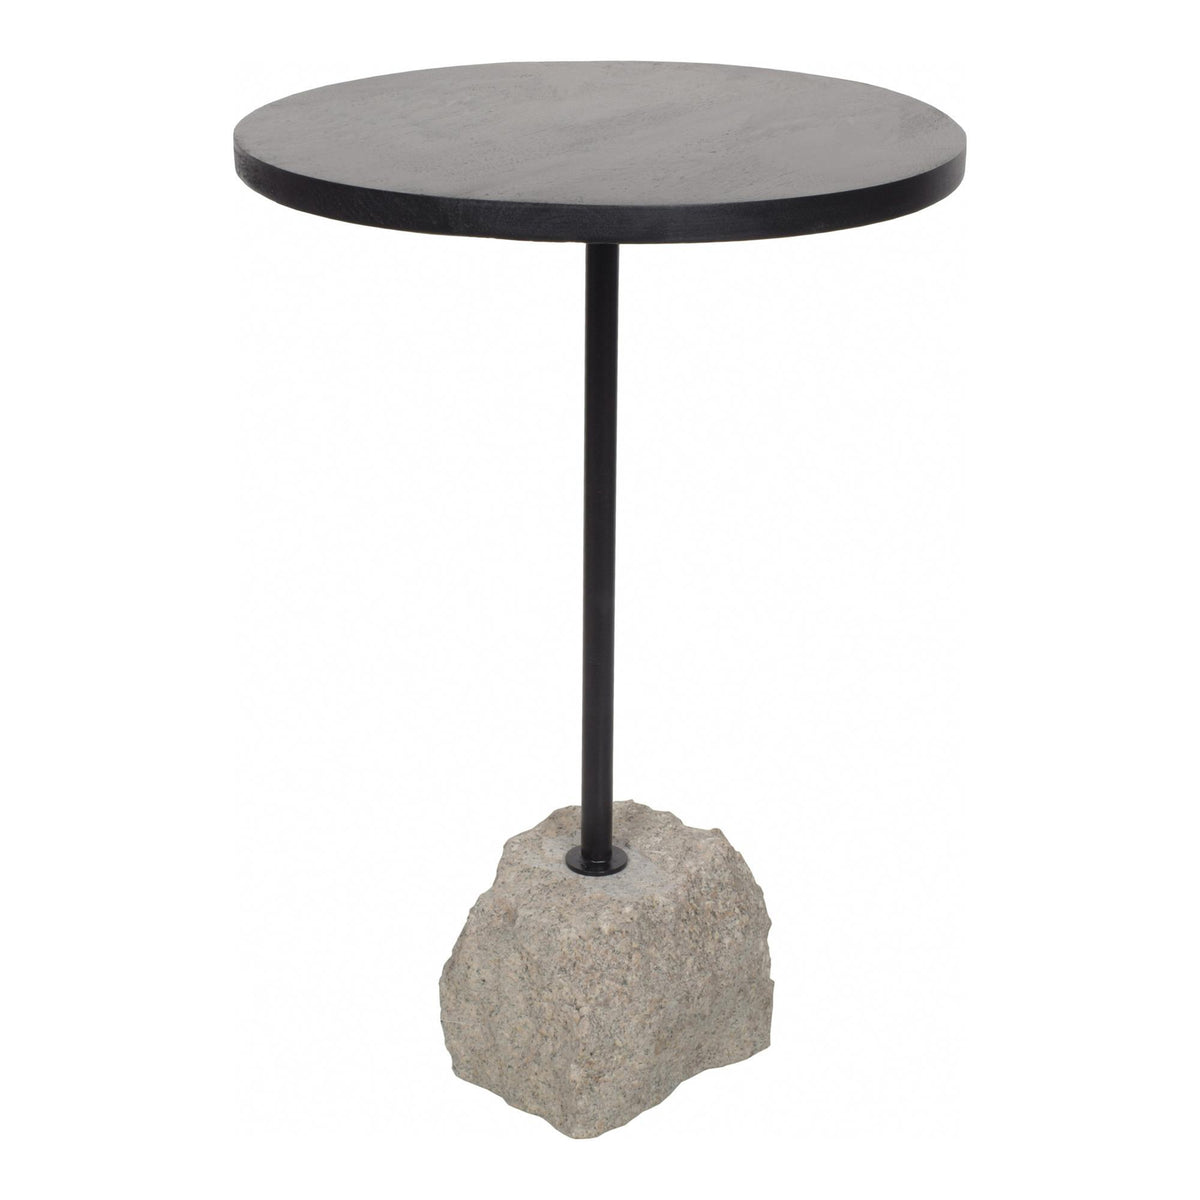 Moe's Home Collection Colo Accent Table Black - FI-1101-02